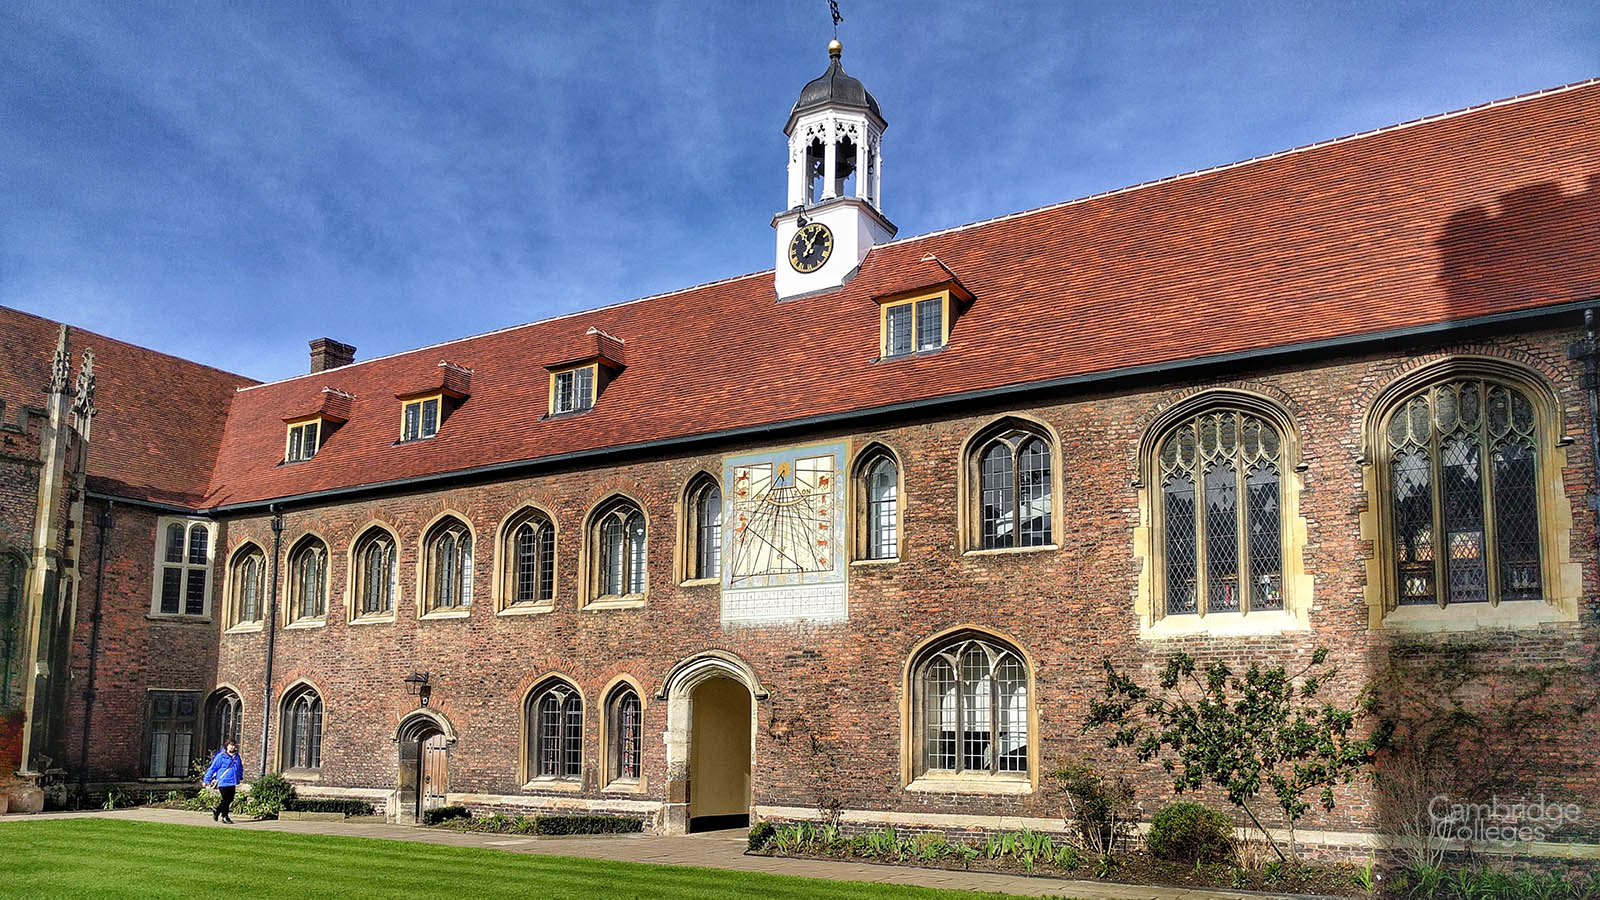 The library and old chapel of Queens' college, Cambridge